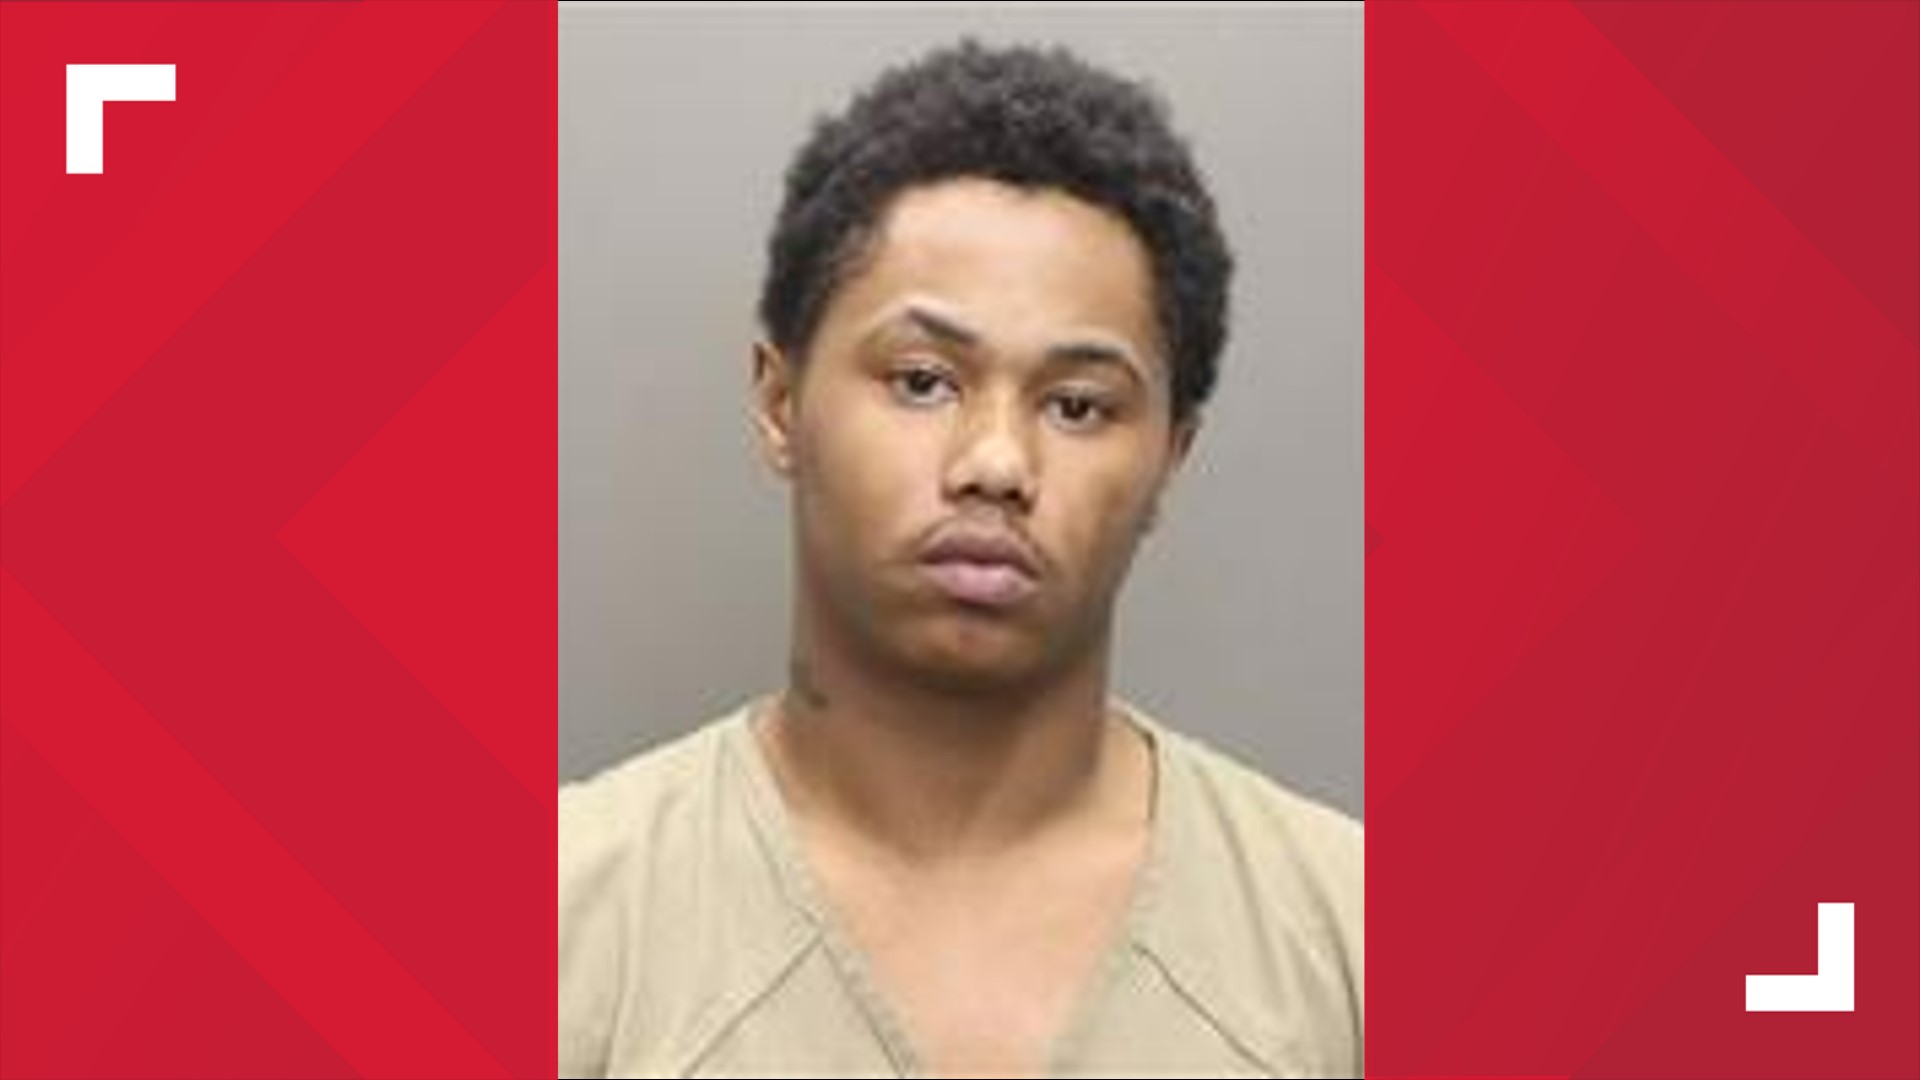 Kalan Hansard was charged with murder in the shooting death of Ronald Smith, records show.